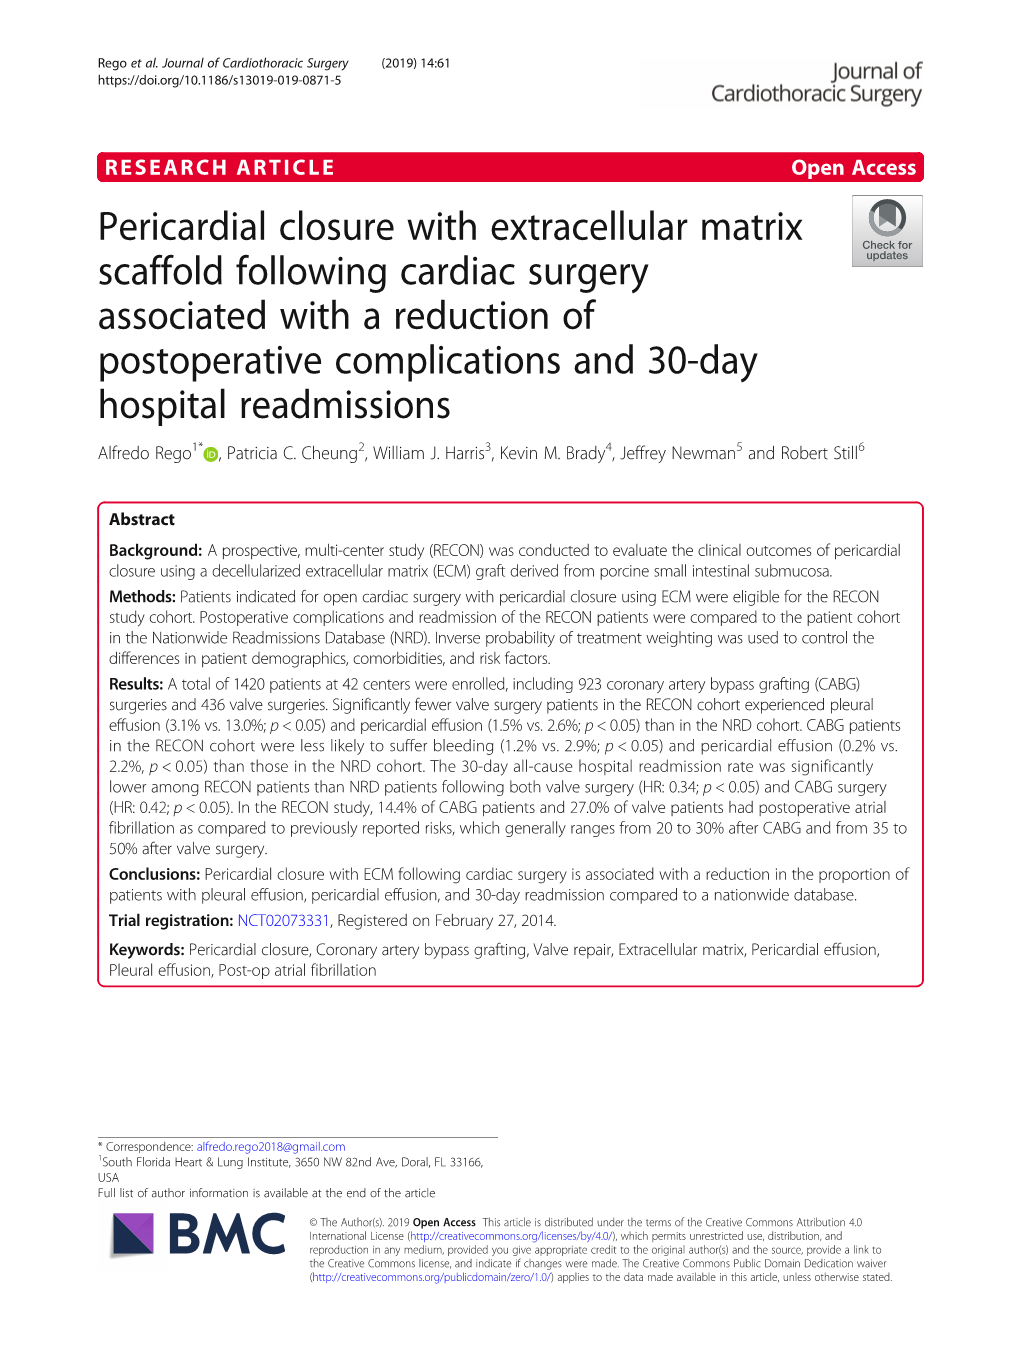 Pericardial Closure with Extracellular Matrix Scaffold Following Cardiac Surgery Associated with a Reduction of Postoperative Co